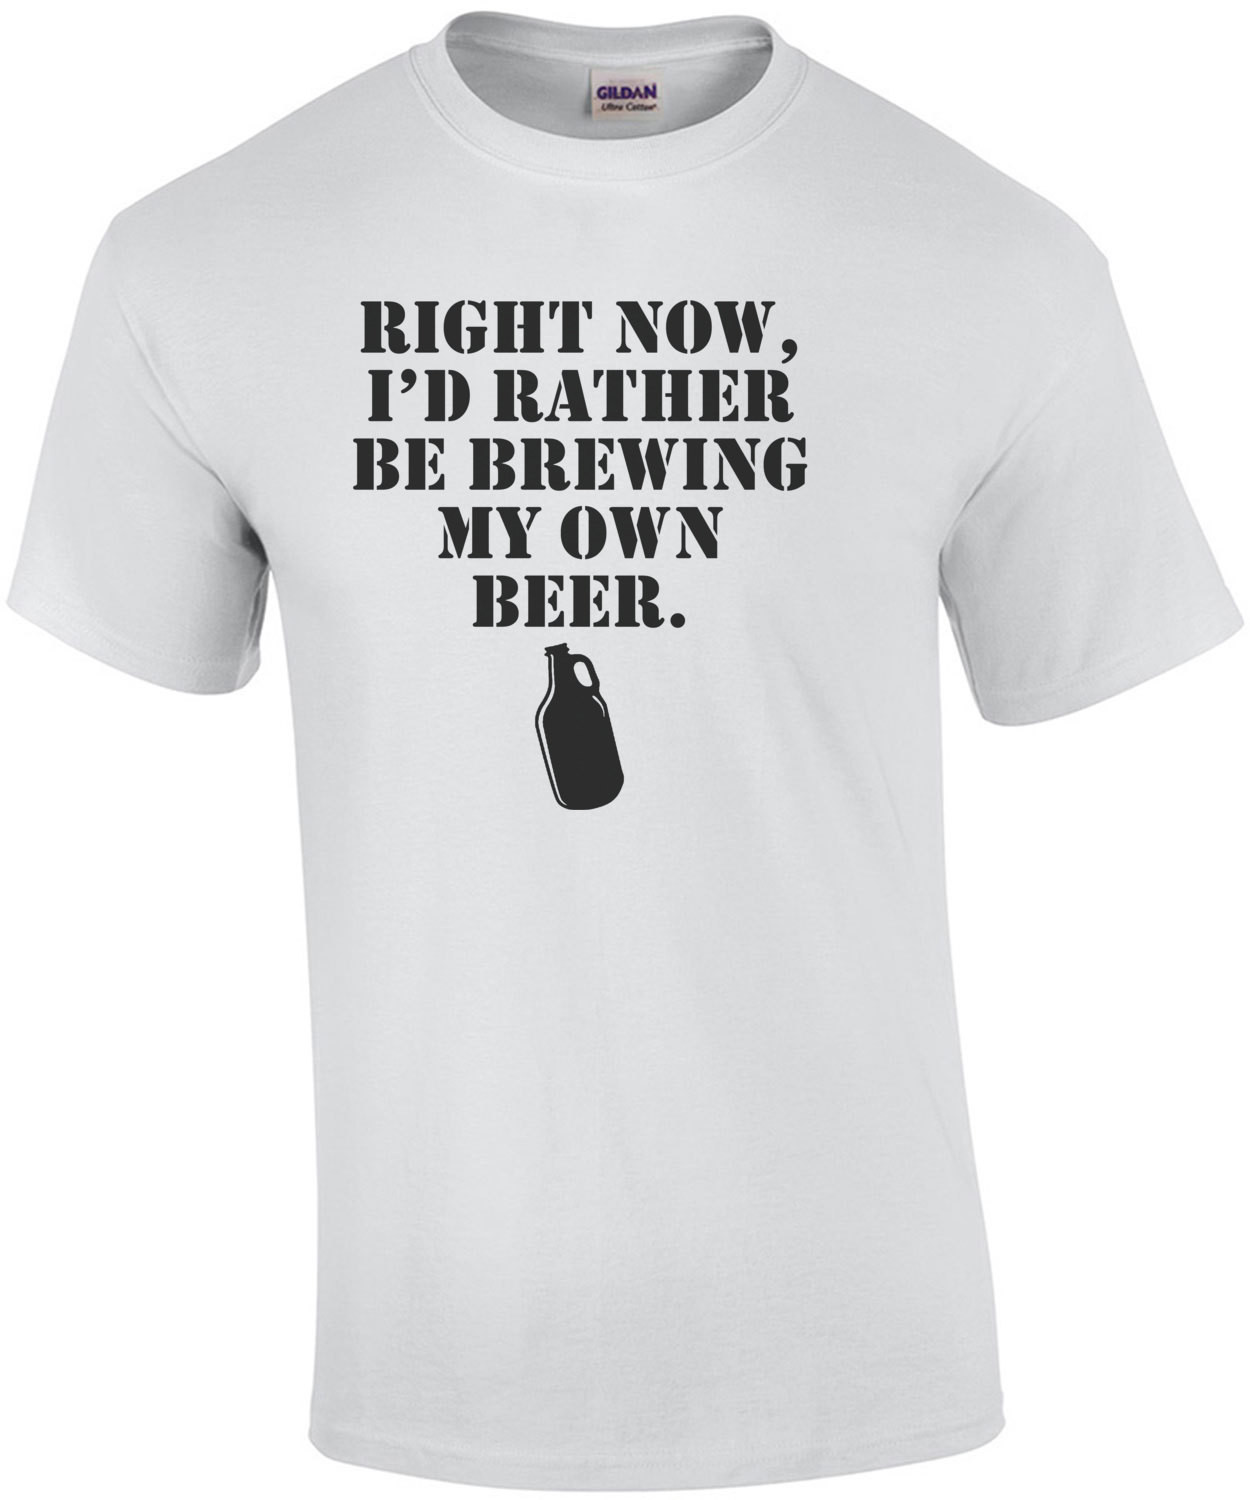 Right Now I'd Rather Be Brewing My Own Beer T-Shirt